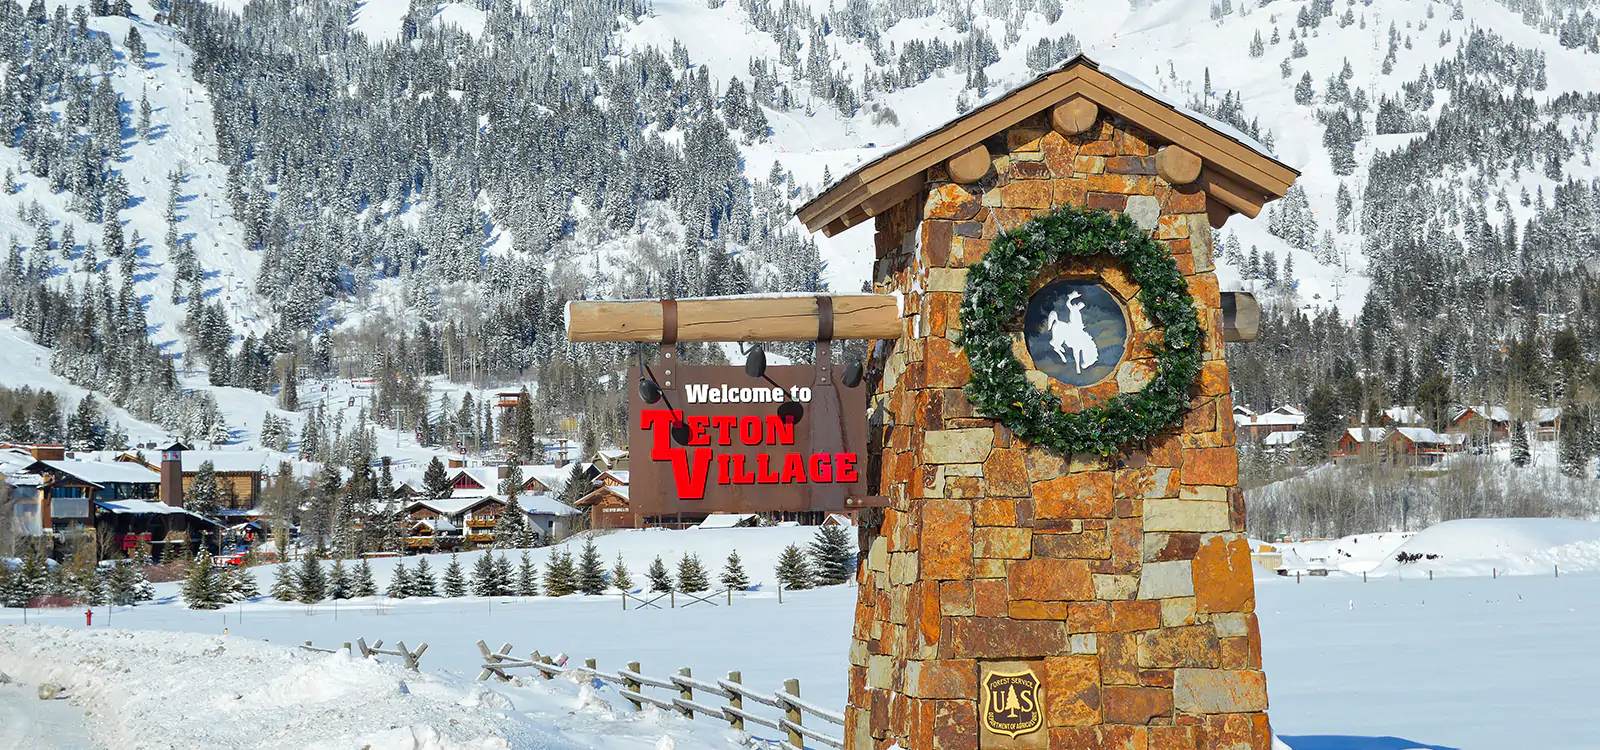 The Teton Village welcome sign, adorned with a wreath, near the entrance of Teton Village, WY.